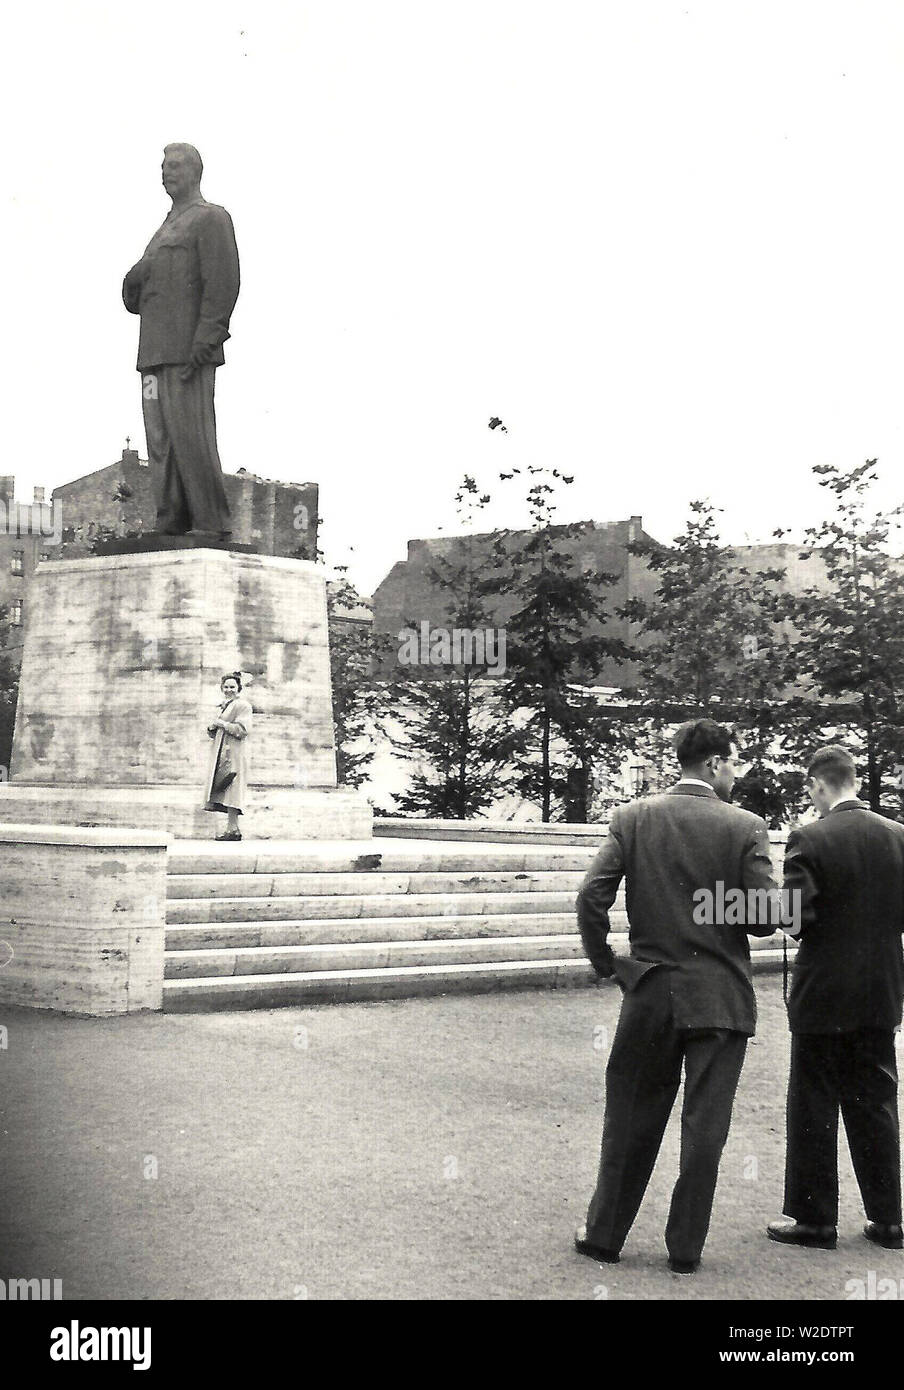 Photograph of two men and a woman in front of the former statue of Joseph Stalin on what is now Karl Marx Allee in Berlin, taken in 1955 (statue removed in 1961?) Stock Photo